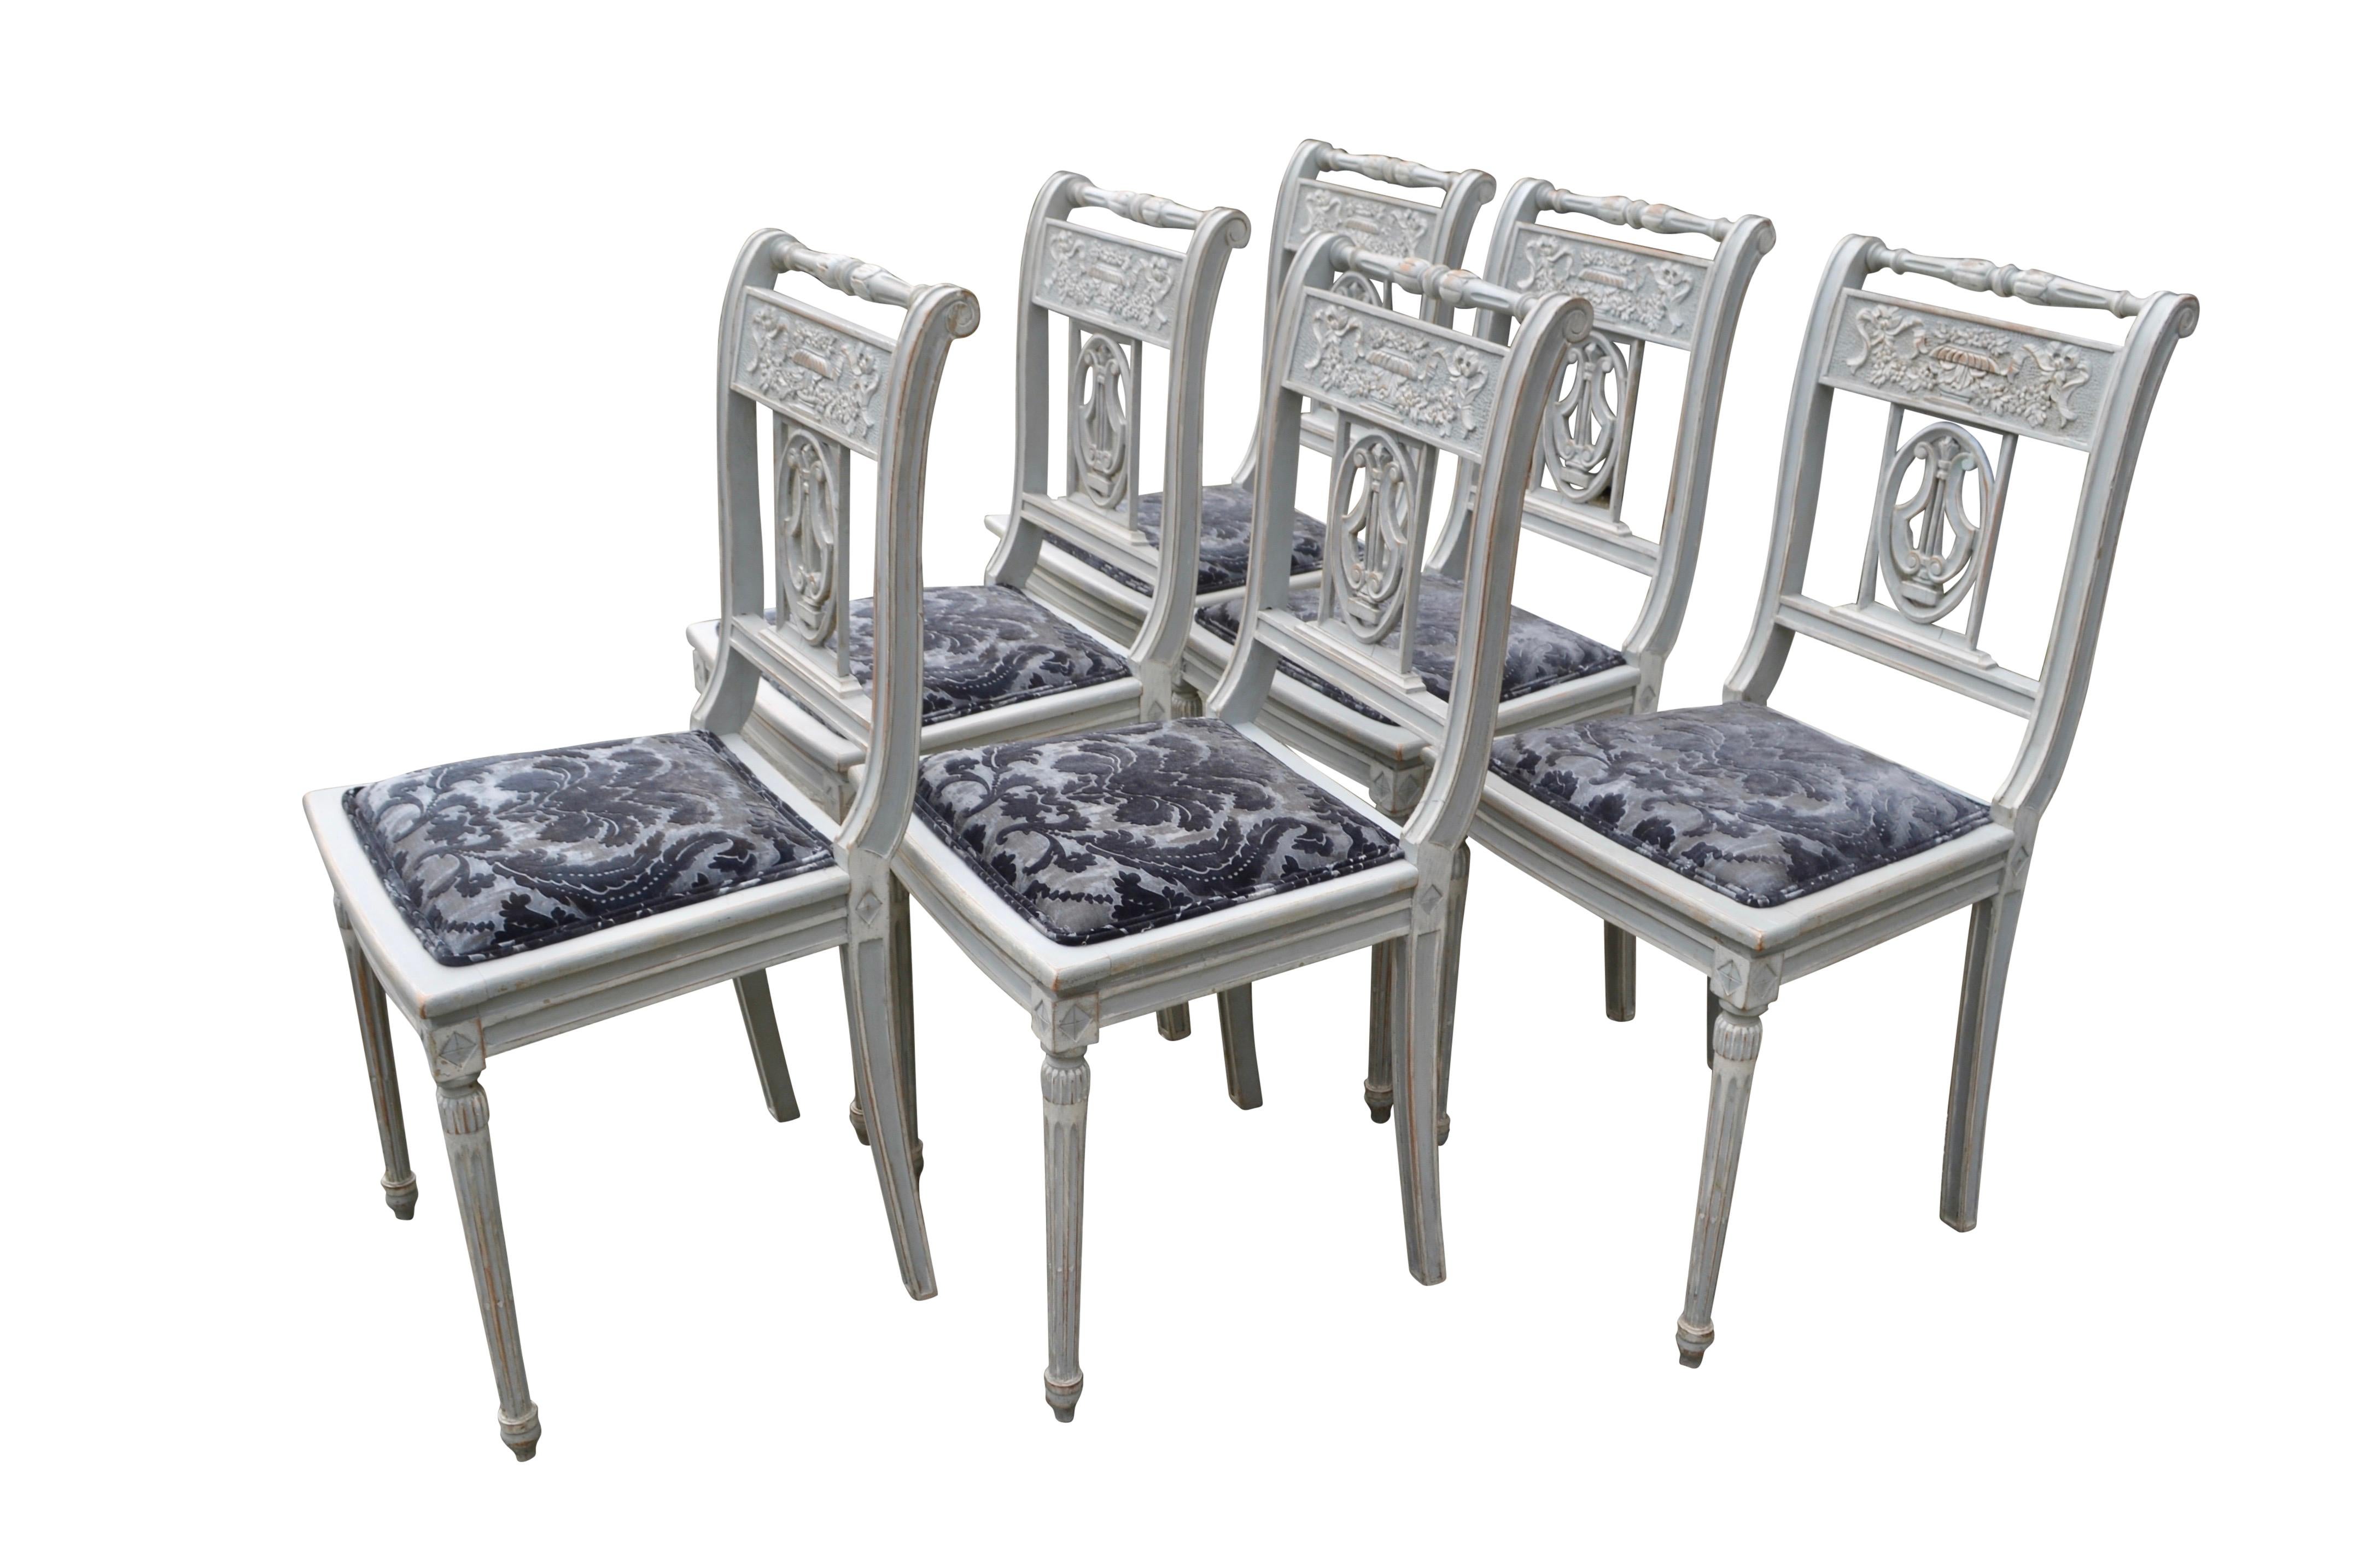 A very decorative set of six dining chairs of classical Directoire style, (referred to as Swedish Gustavian style). The open chair backs feature a central carved harp within an oval and above, a carved urn with flowers and garlands. The frames are